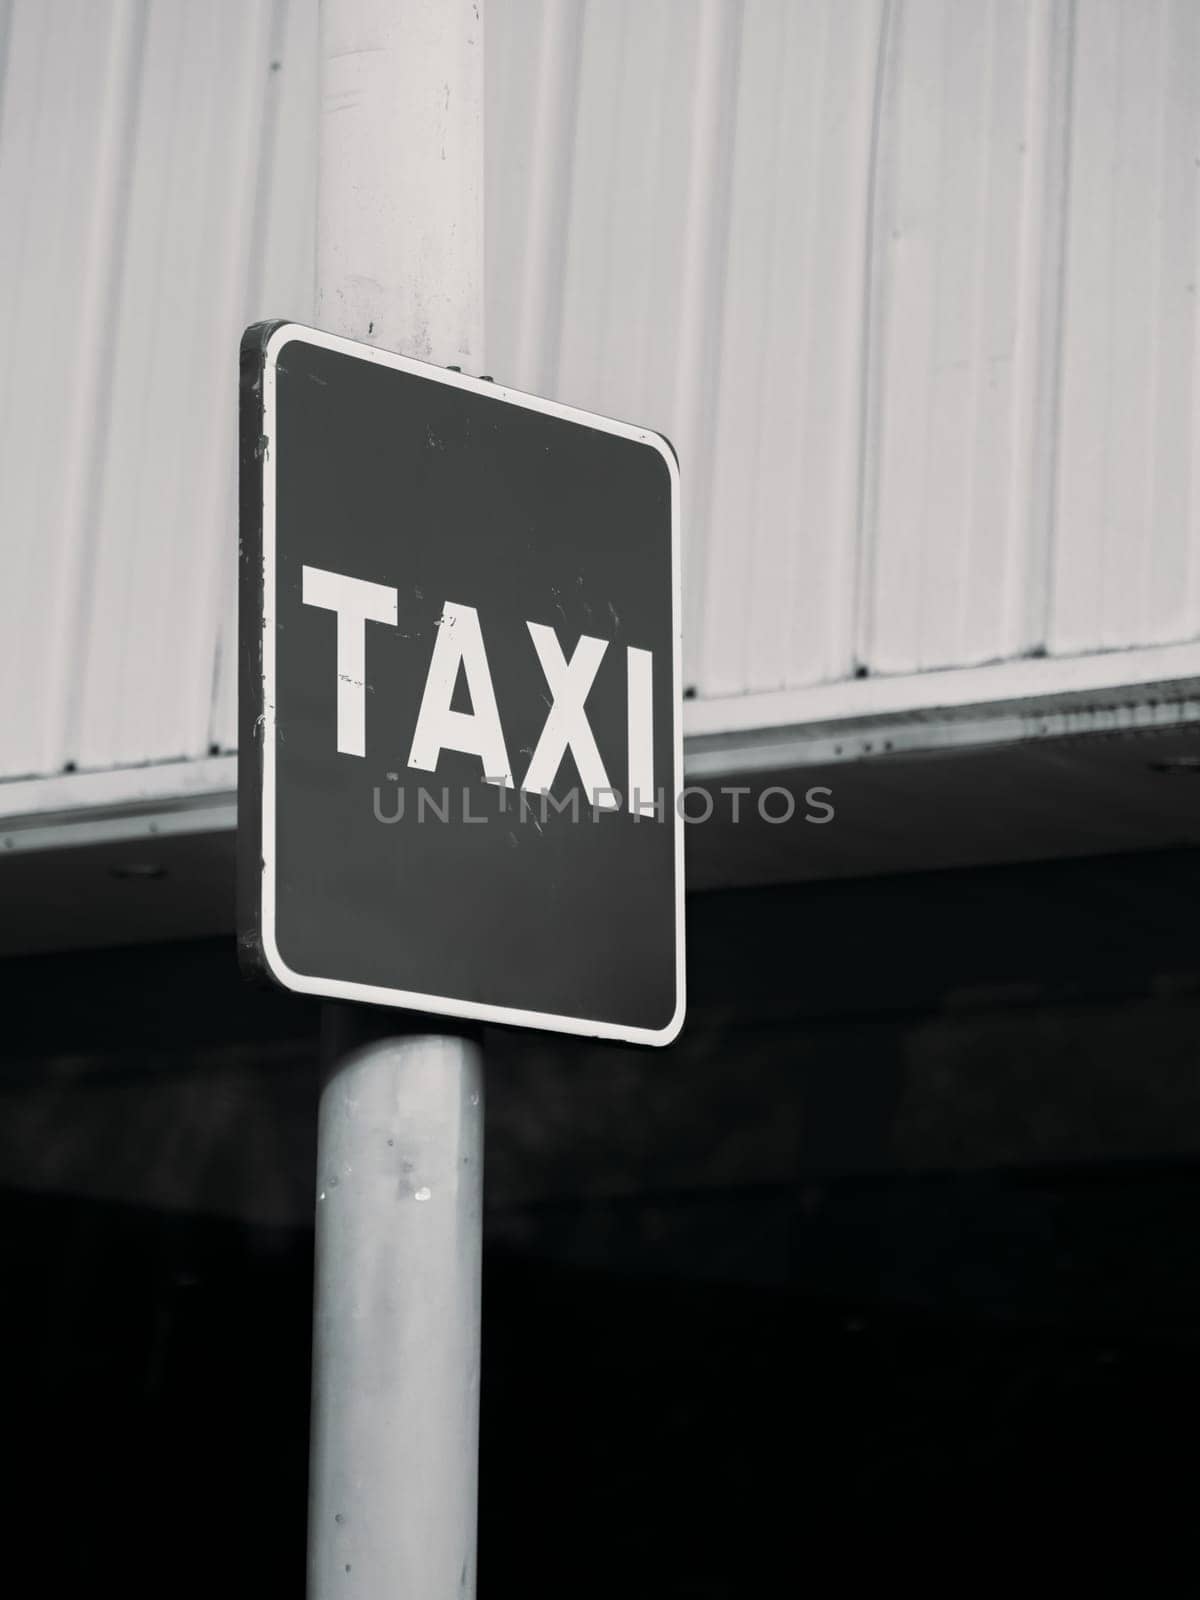 Monochrome Image of a Taxi Sign Against Industrial Background by apavlin